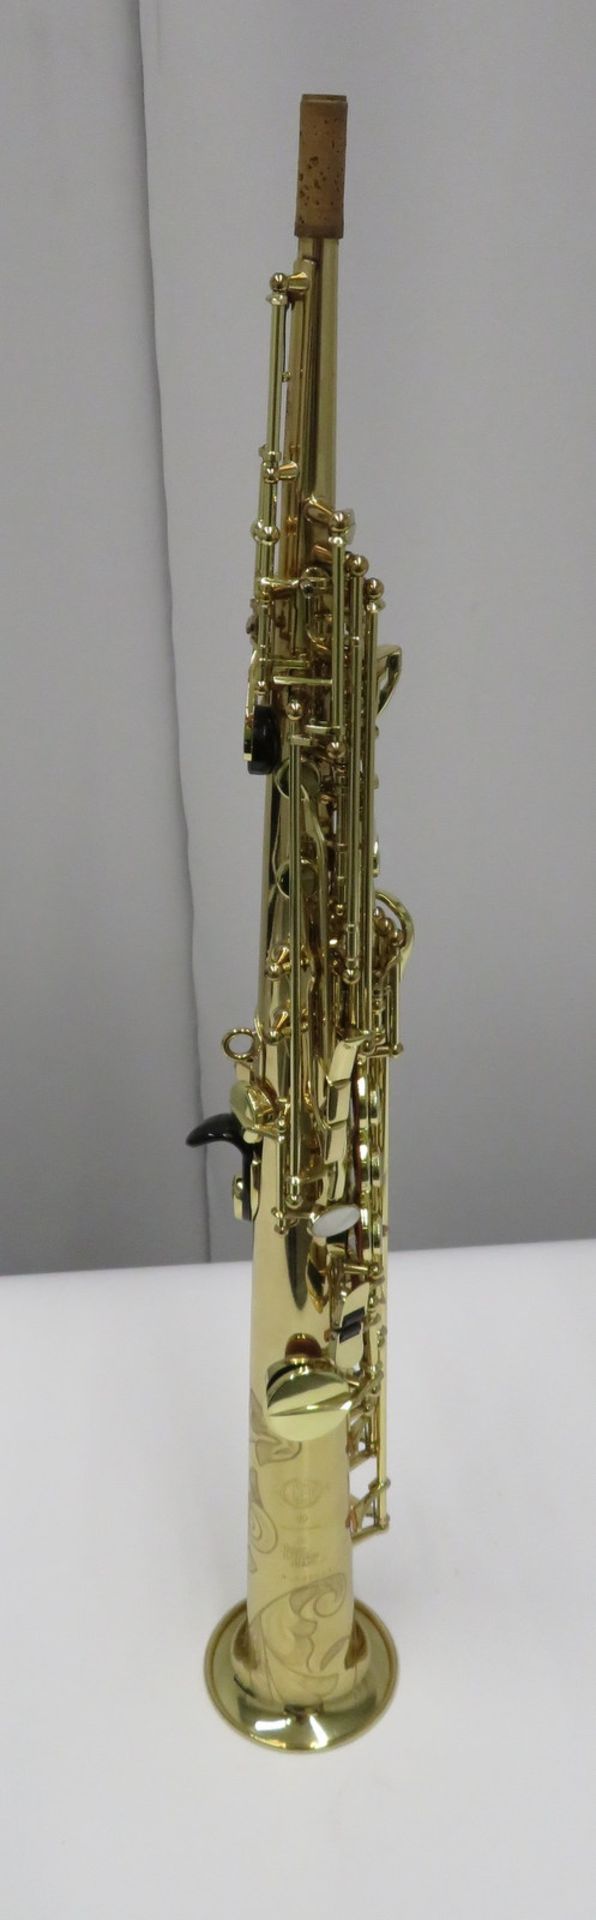 Henri Selmer 80 super action series 2 soprano saxophone with case. Serial number: N.530523. - Image 2 of 14